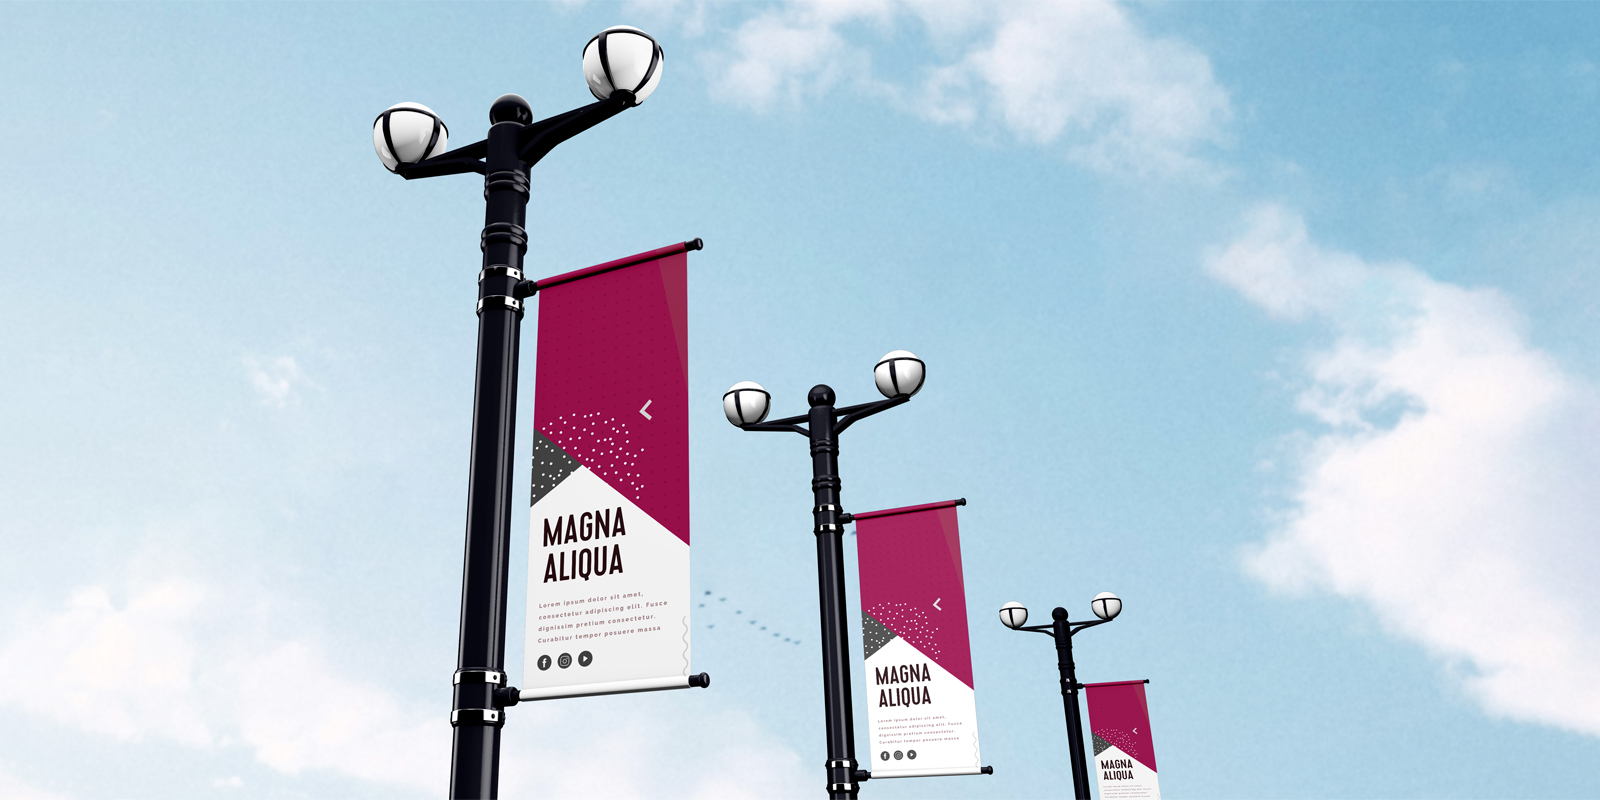 Pole banners in Ballarat - Print with Pagerr